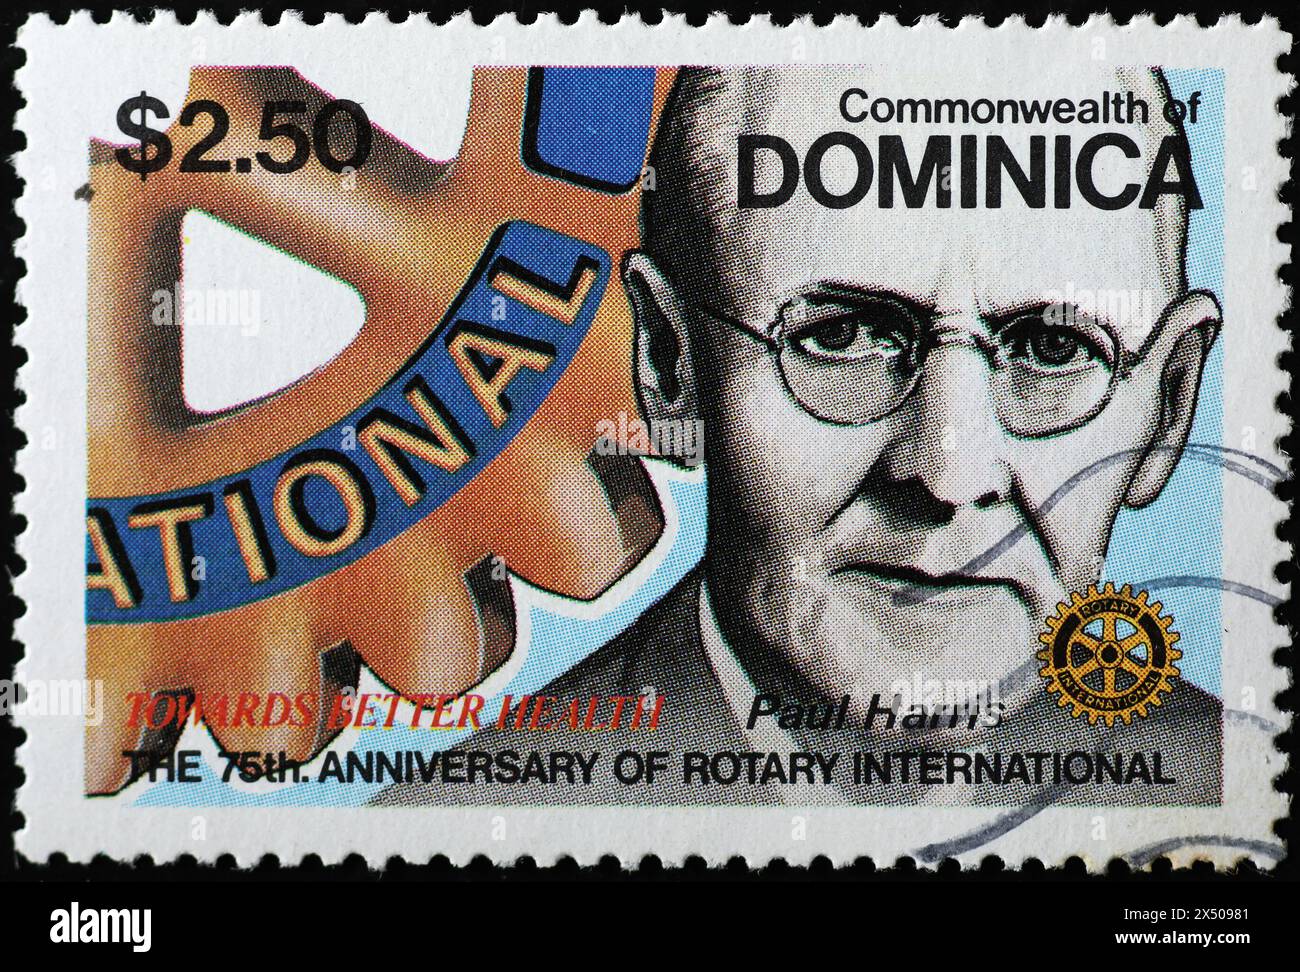 Founder of Rotary International Paul Harris on postage stamp Stock Photo